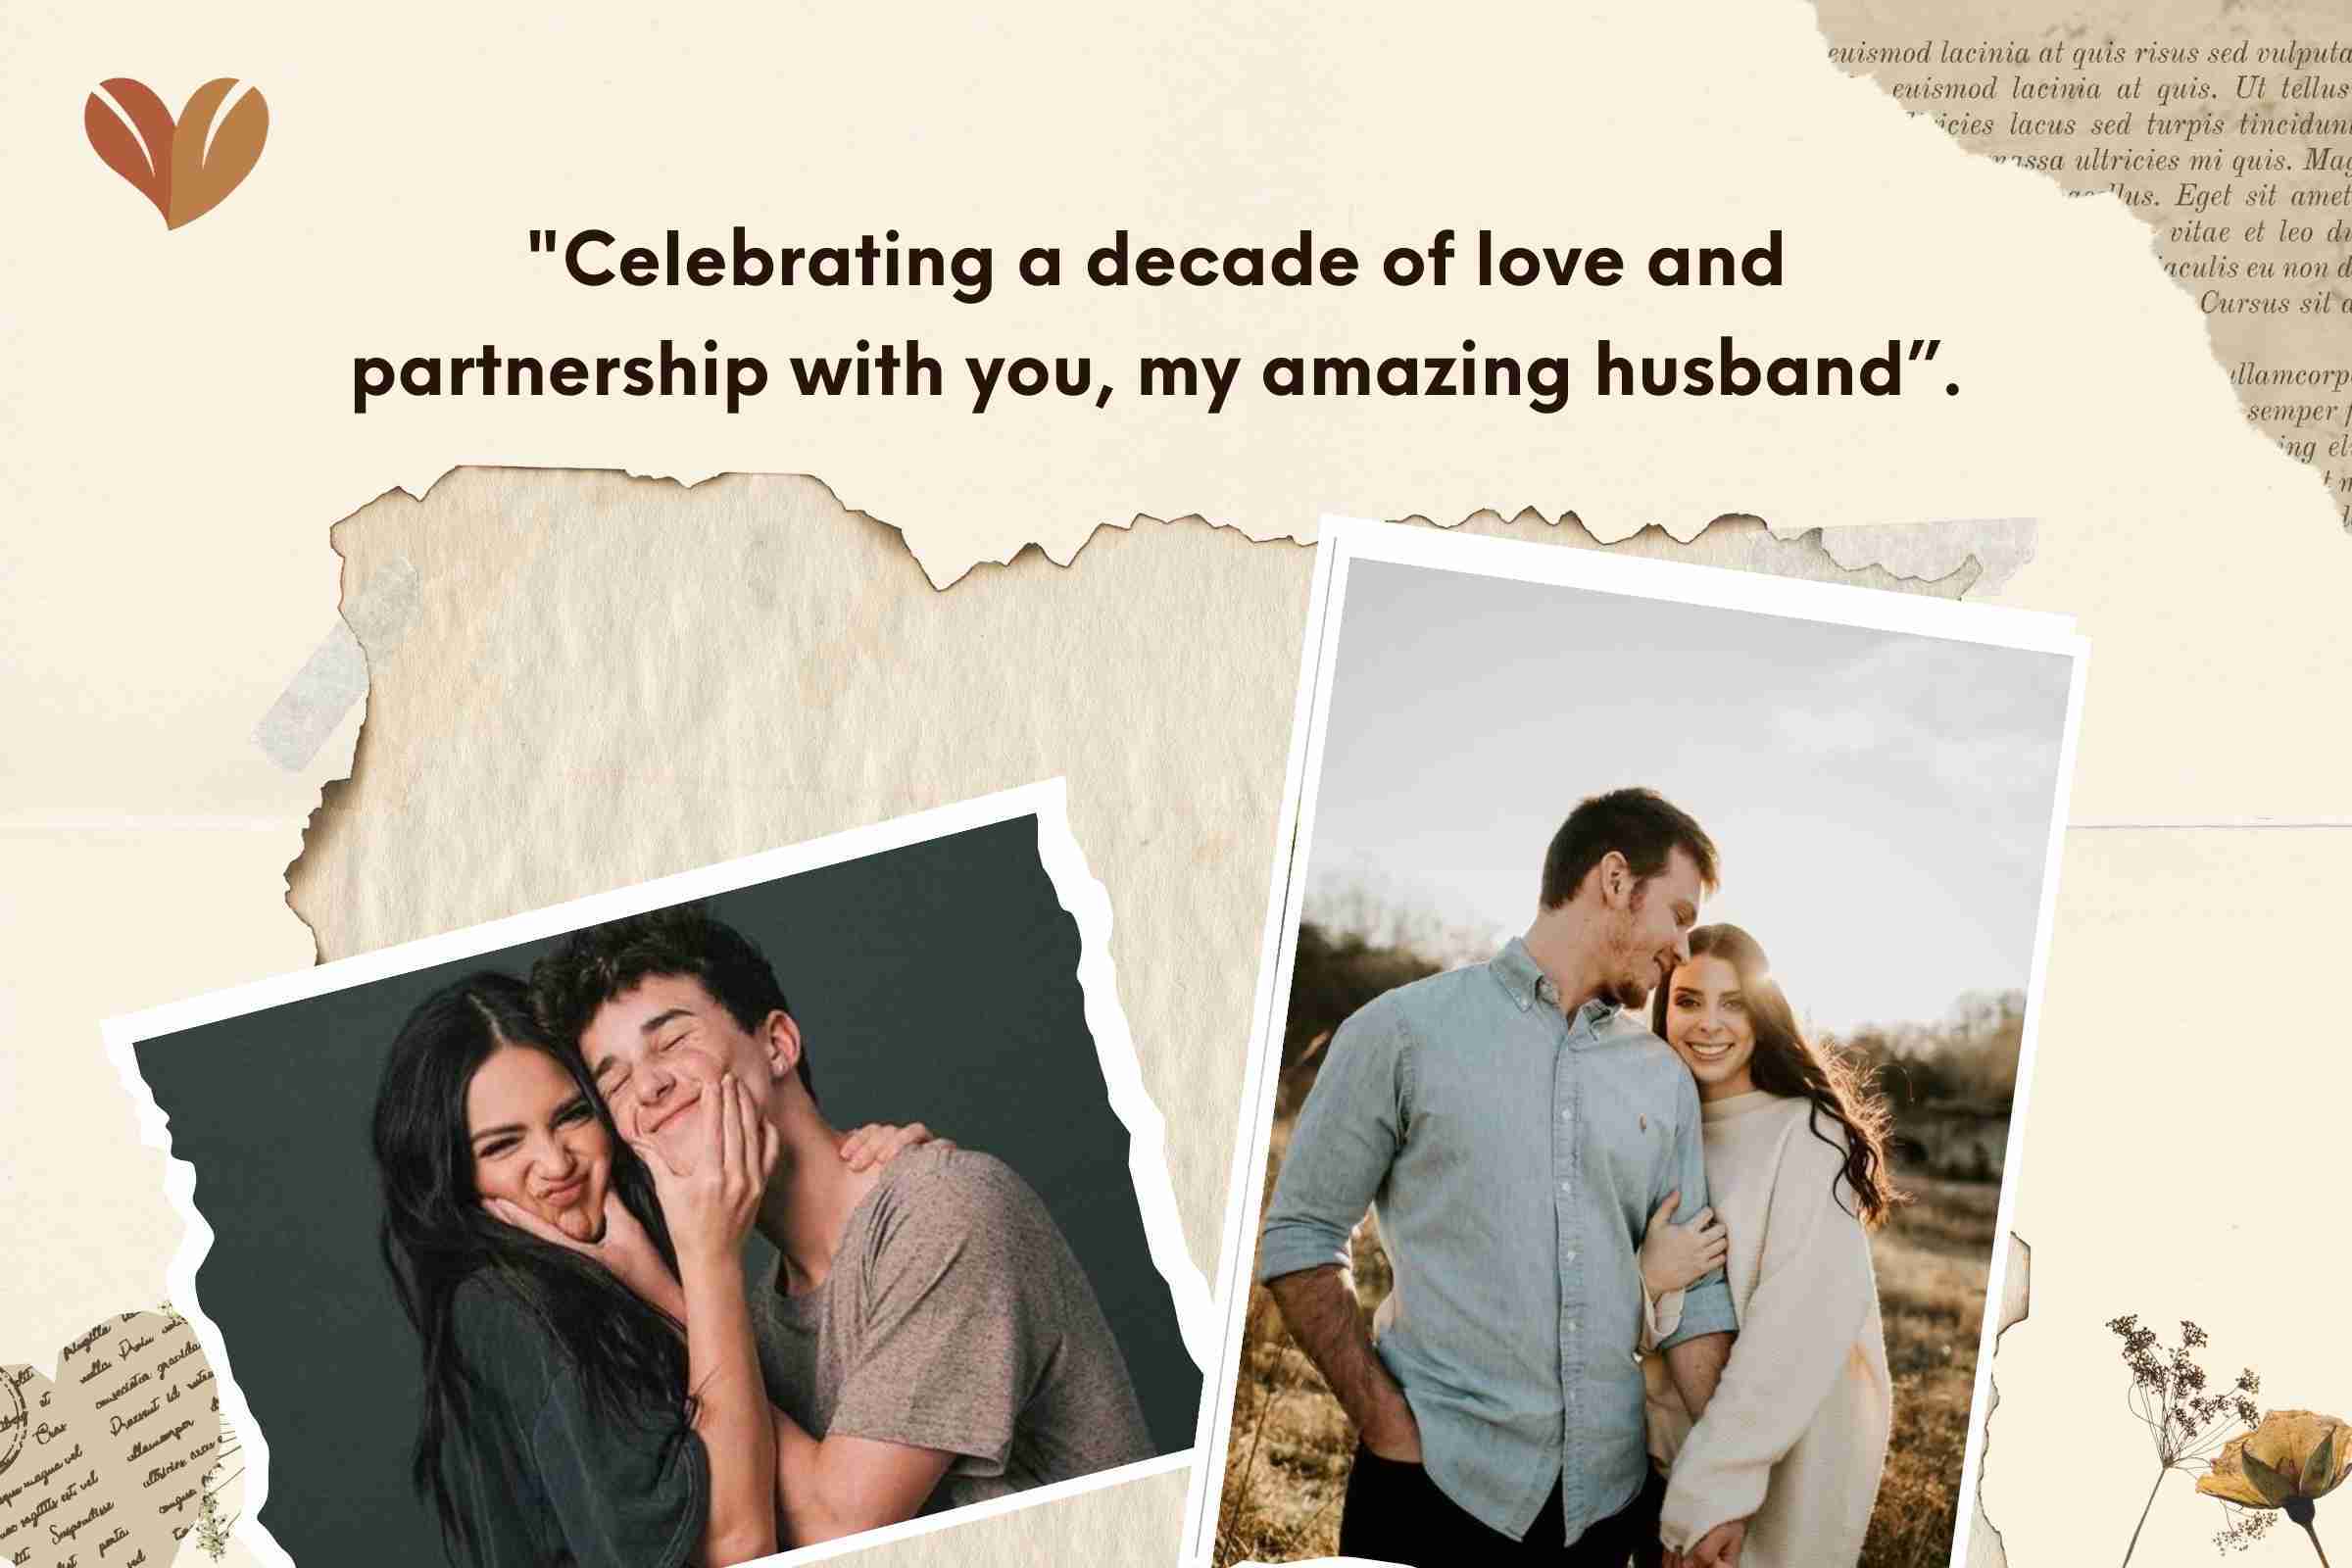 "Celebrating a decade of love and partnership with you, my amazing husband”.